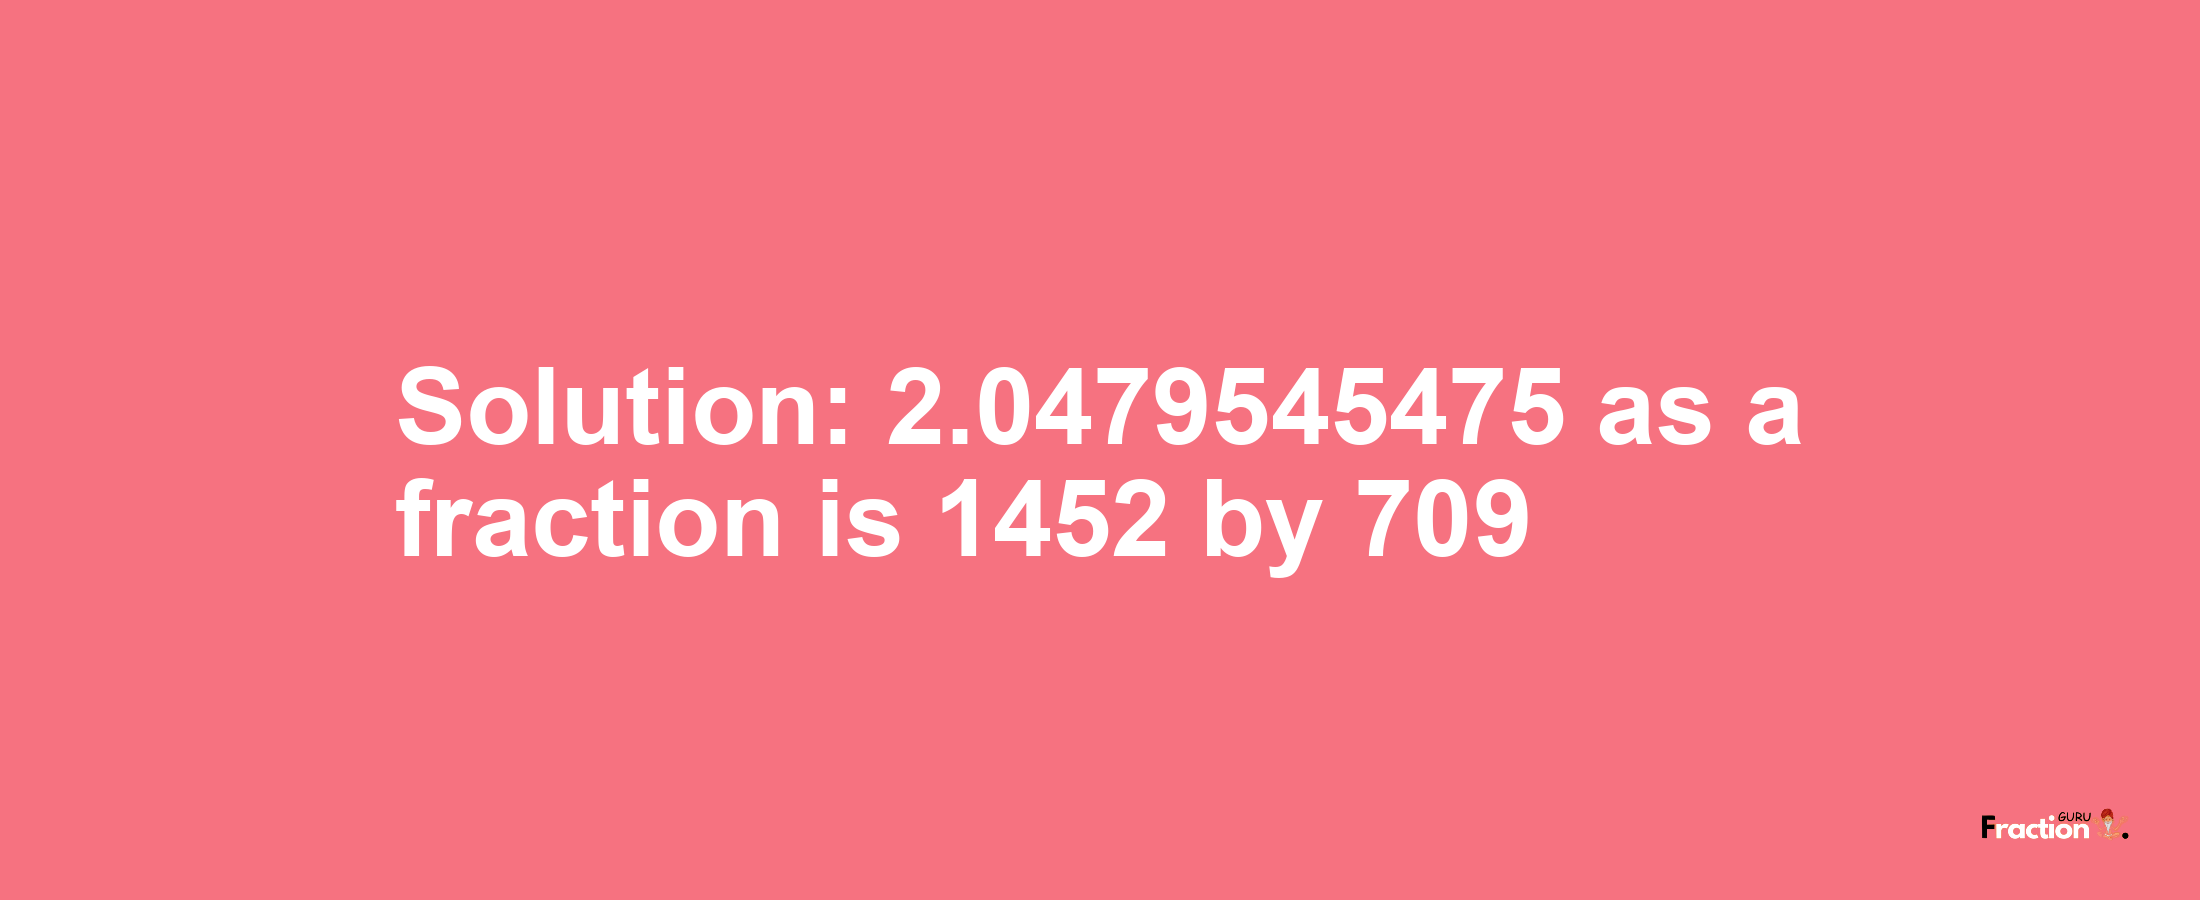 Solution:2.0479545475 as a fraction is 1452/709